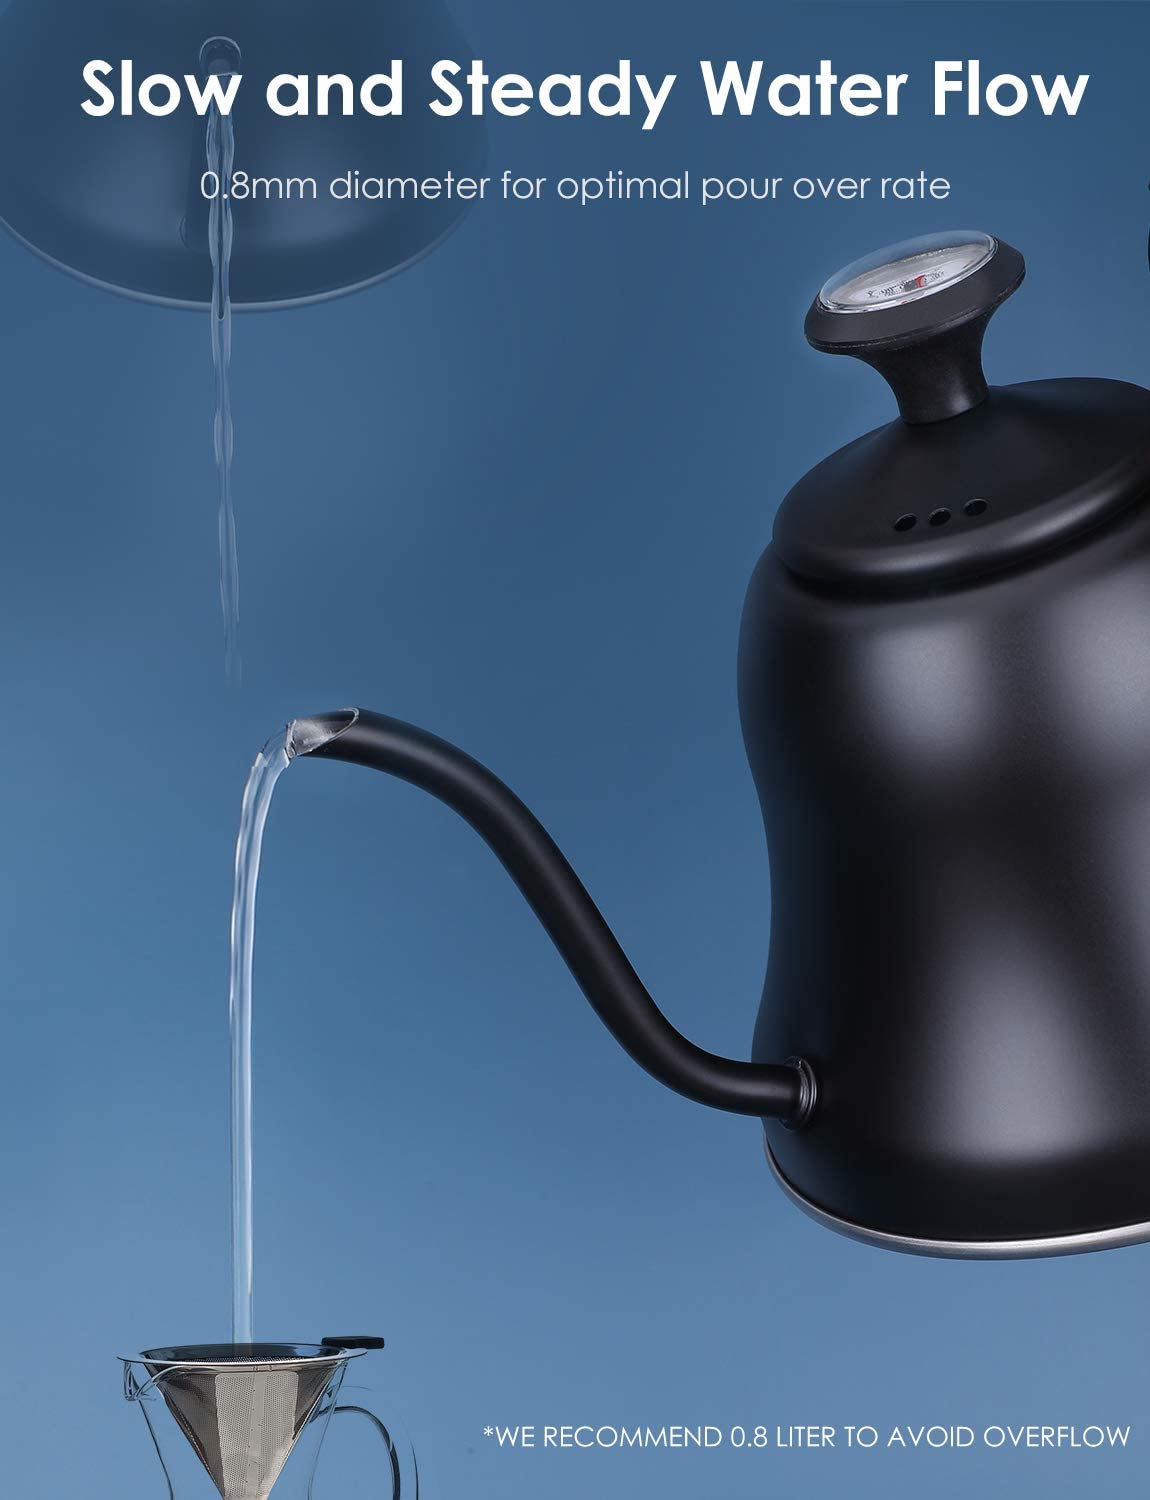 Tea Kettle with Thermometer Pot Black Gooseneck Kettle Teapot Pour Over  Coffee Kettle with Thermometer 40 floz/1200ml Gooseneck Kettle with